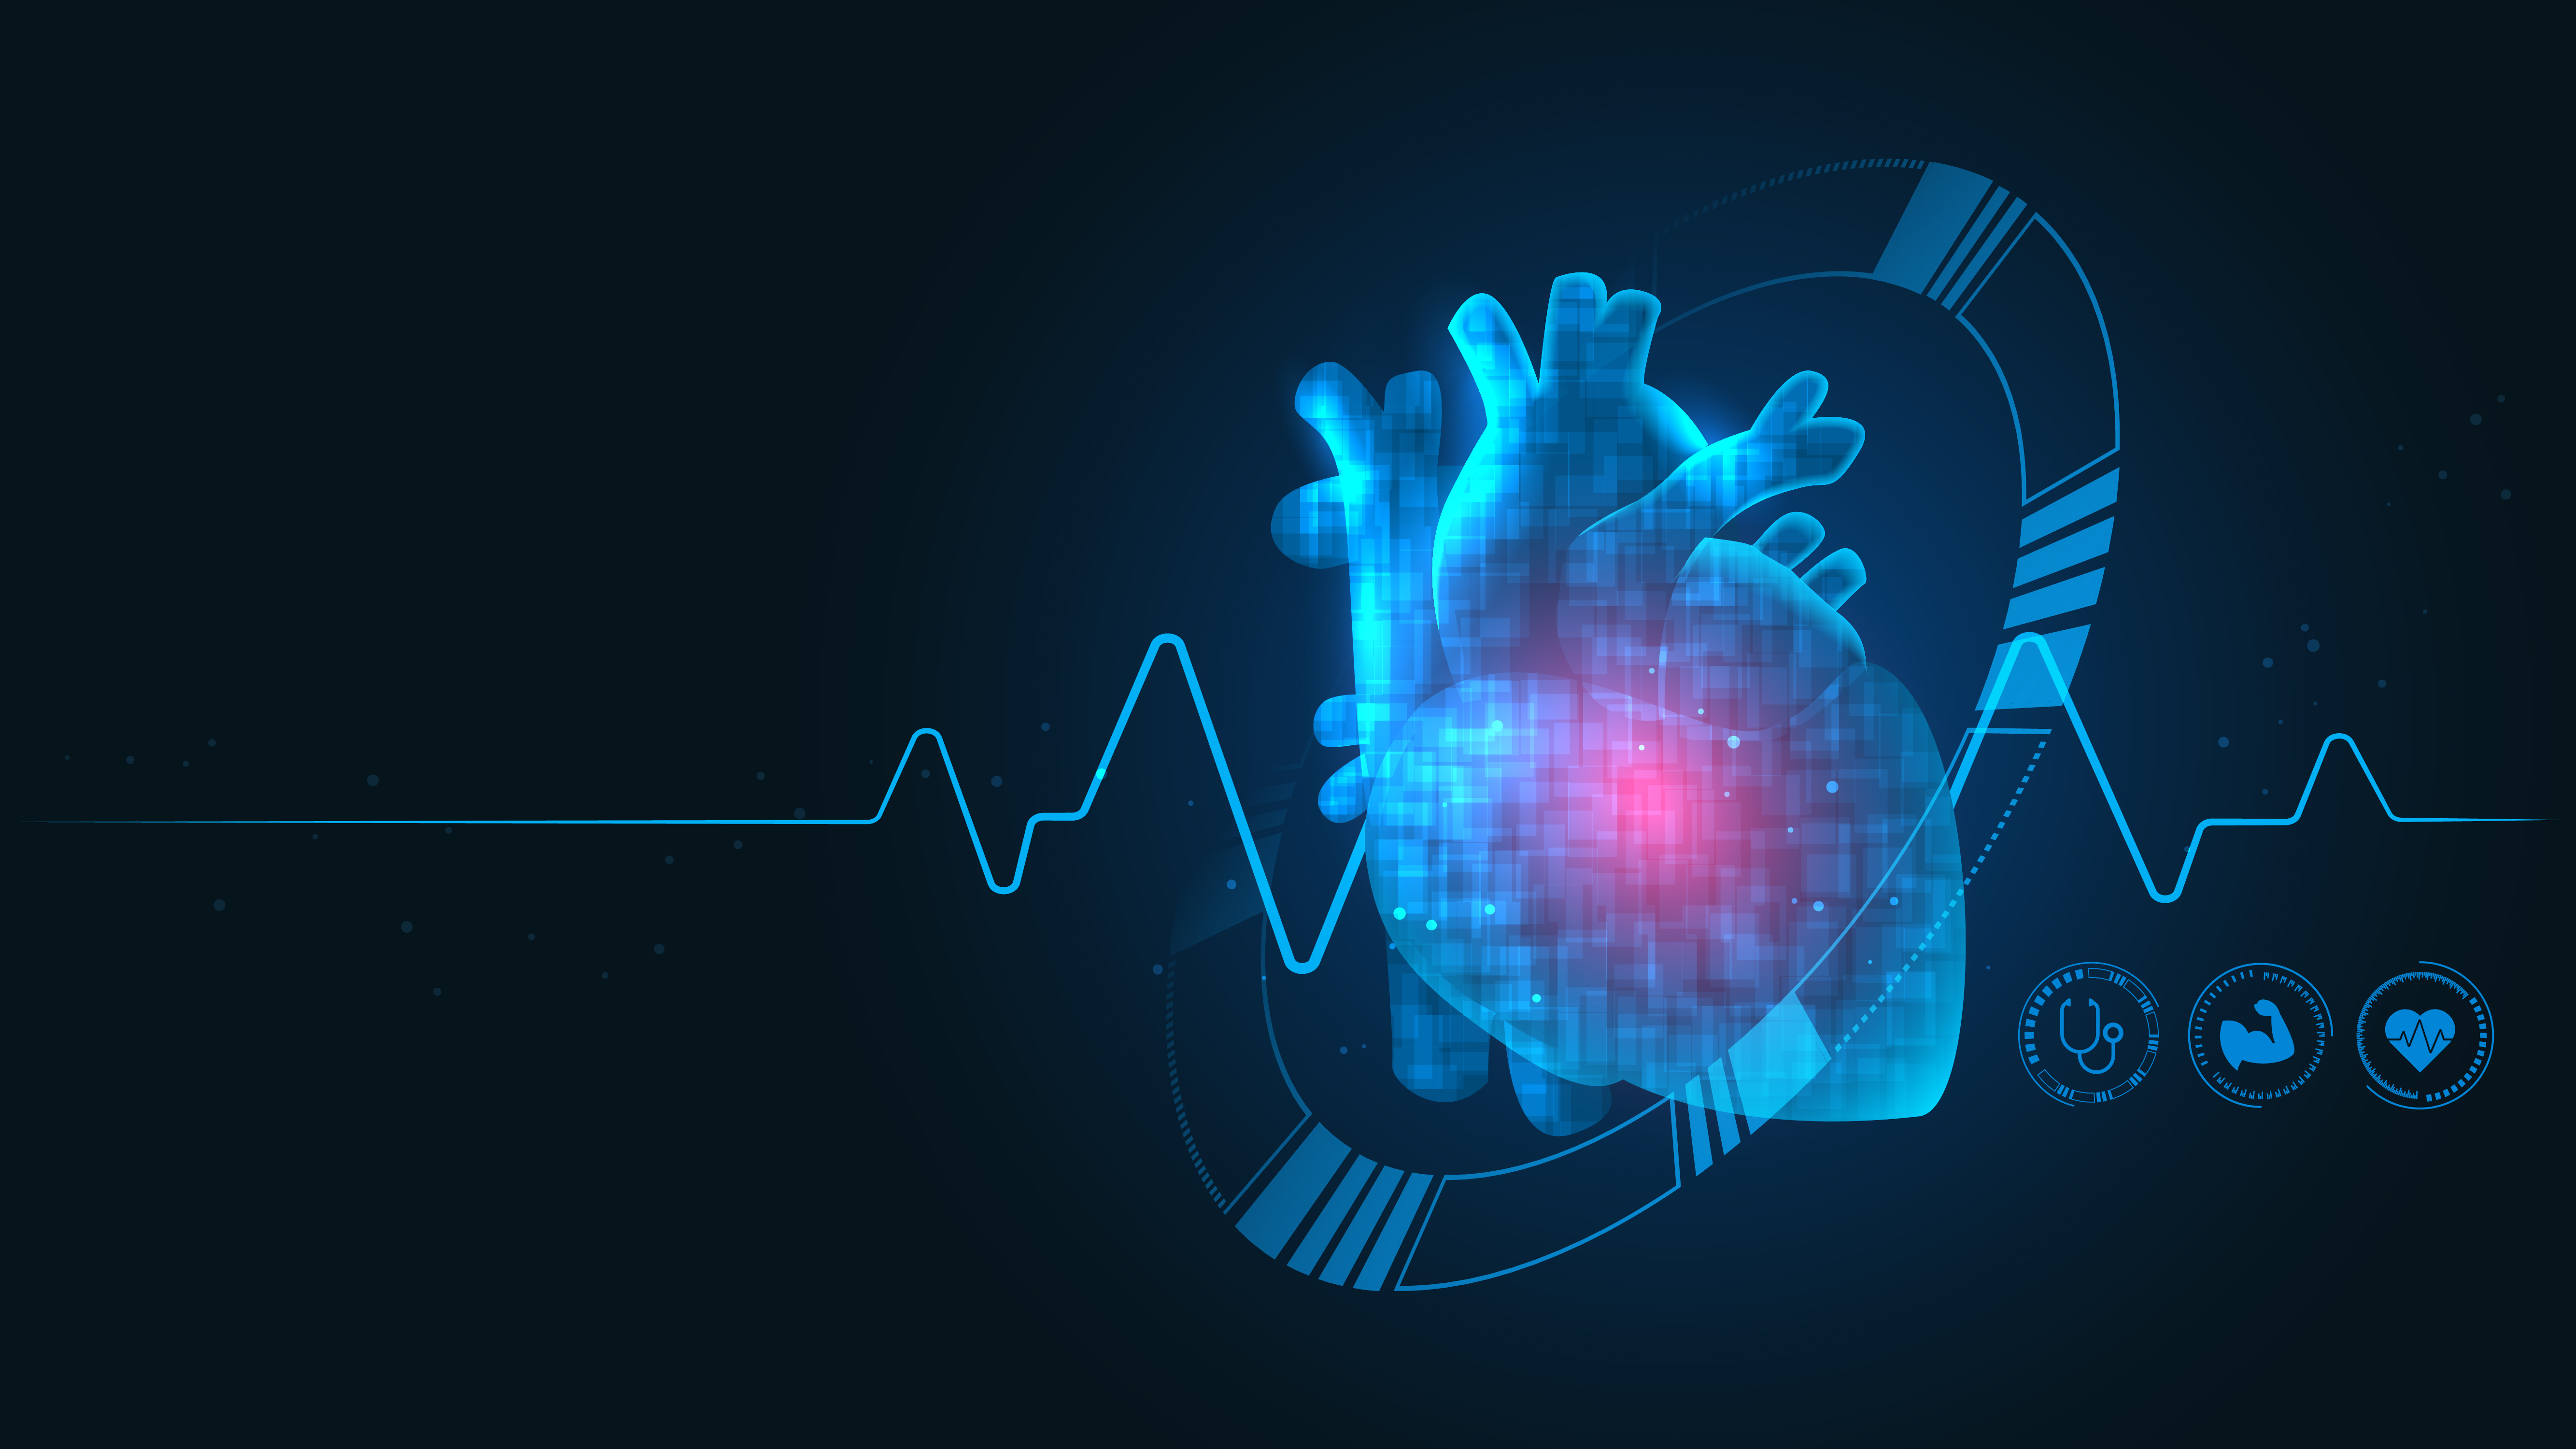 medtronic-partners-with-cardiac-design-labs-to-introduce-advanced-heart-monitoring-technology-in-india